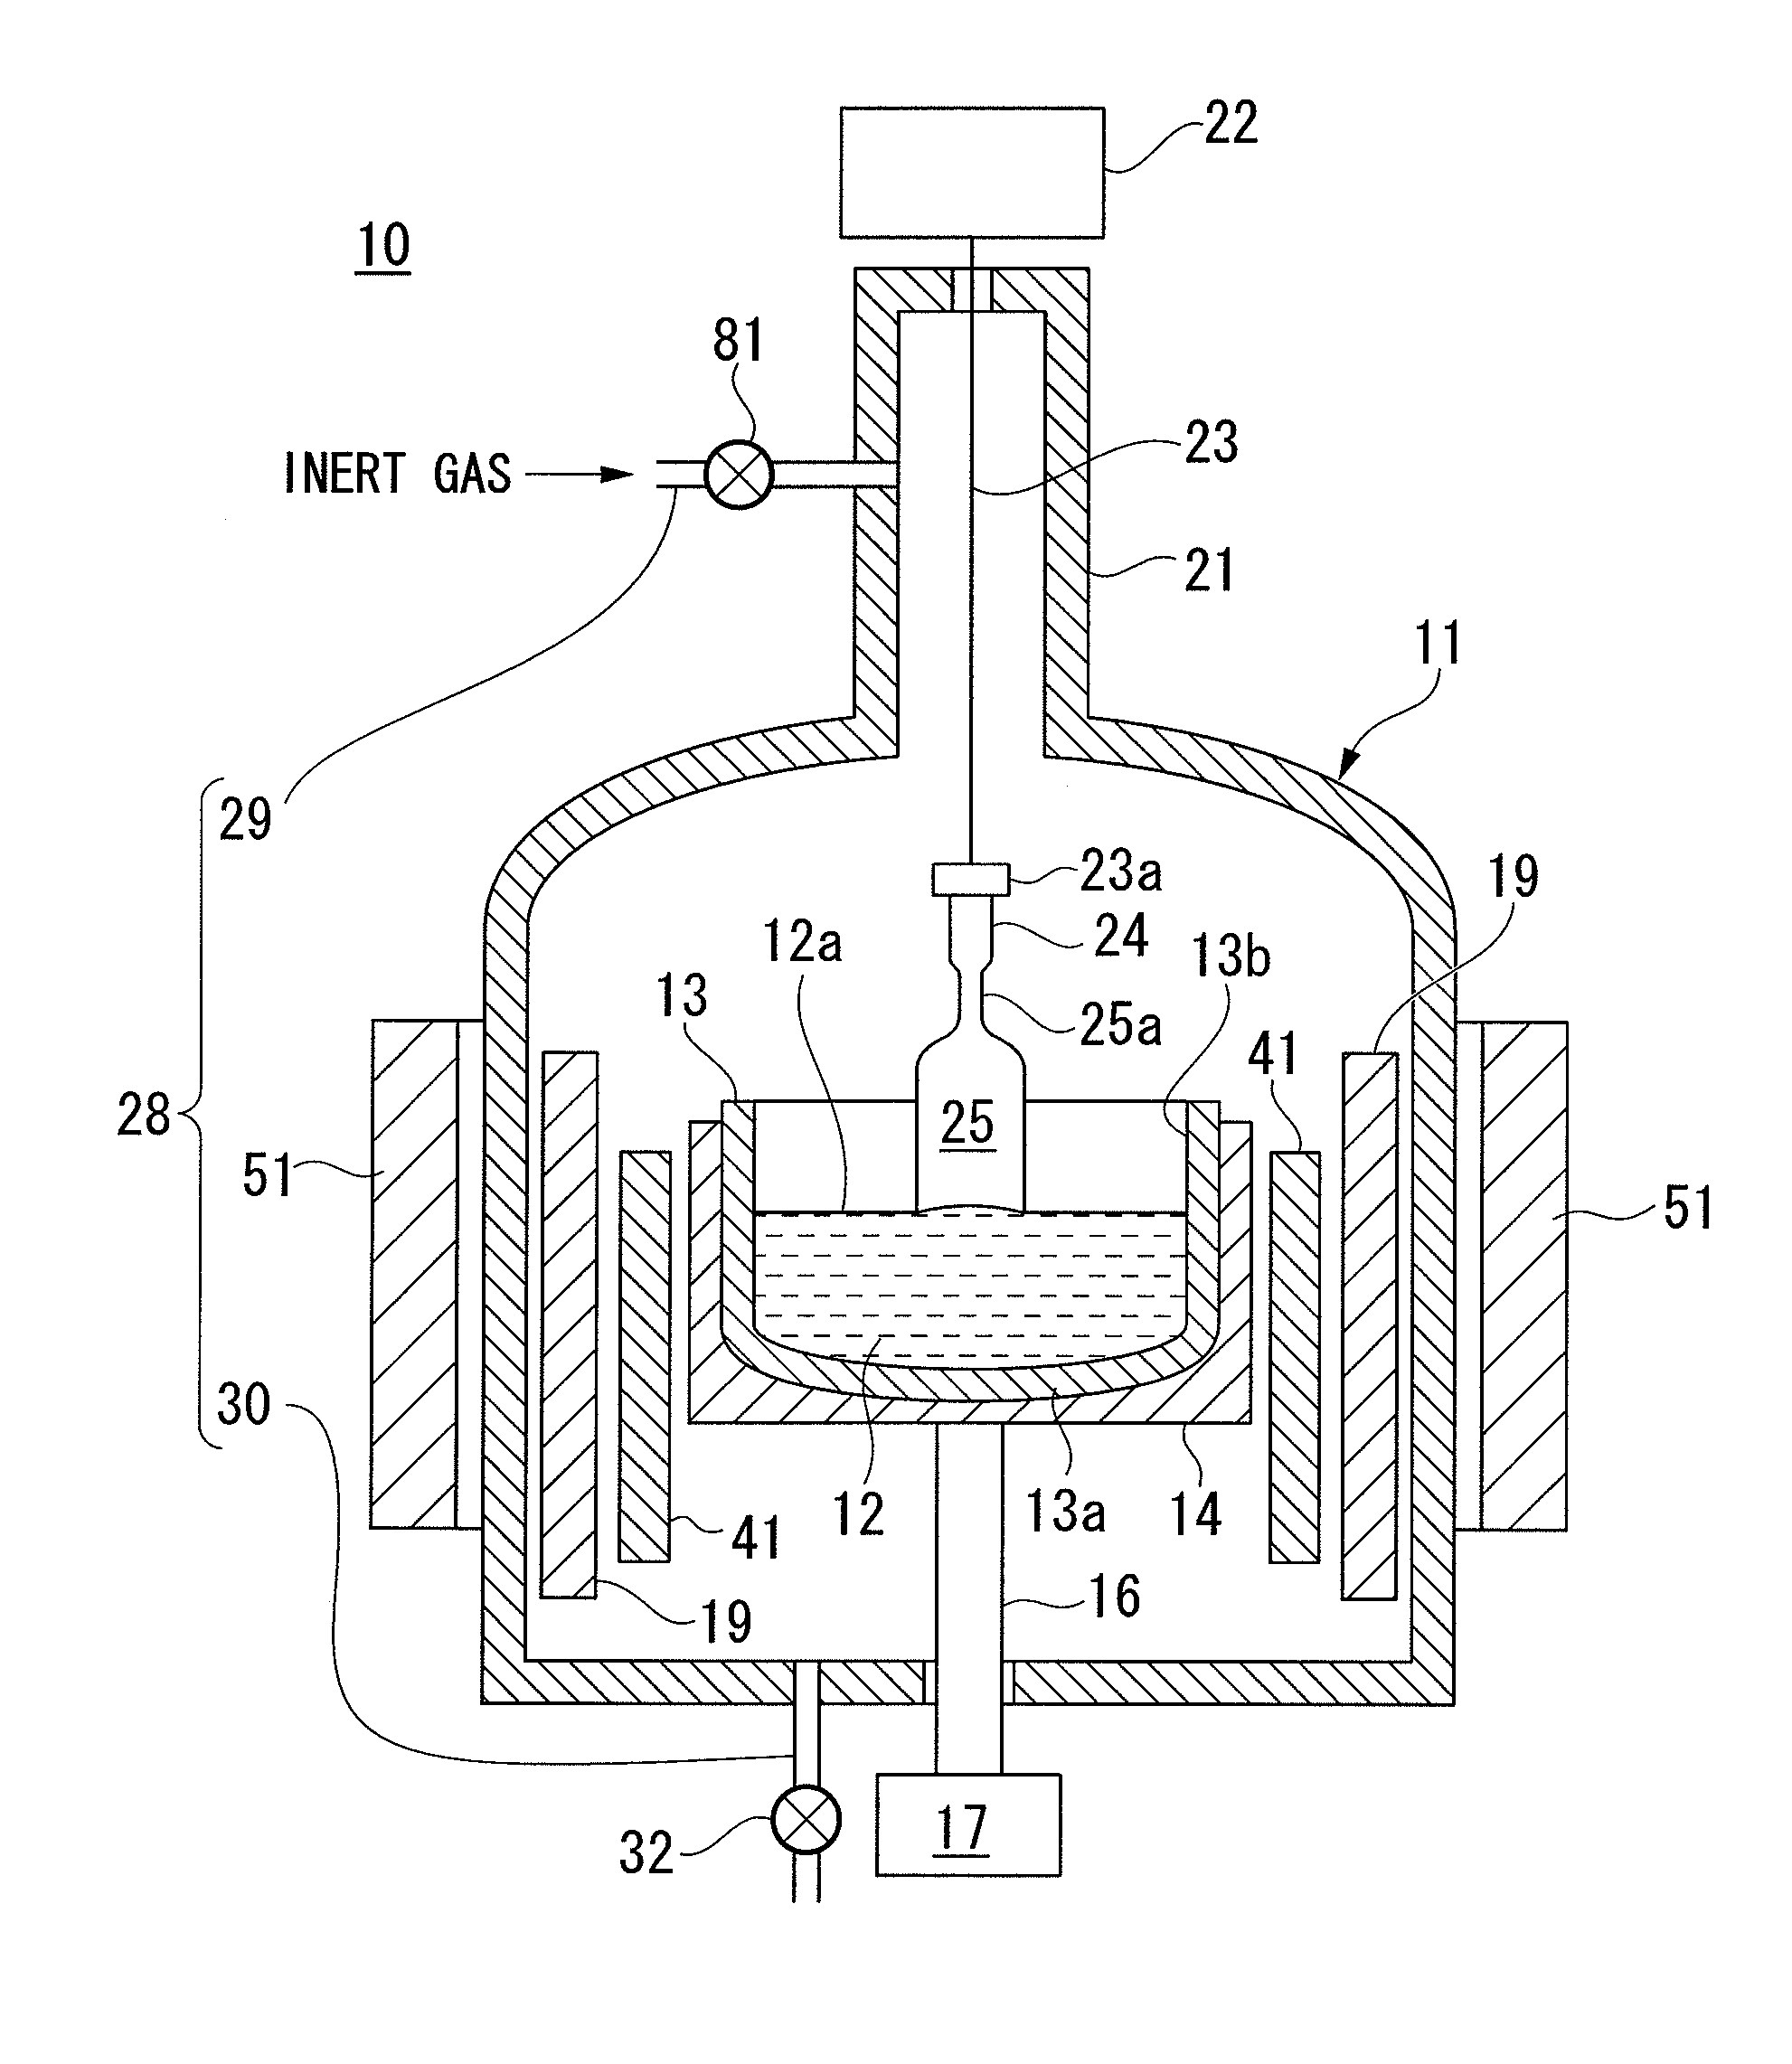 Apparatus for pulling silicon single crystal